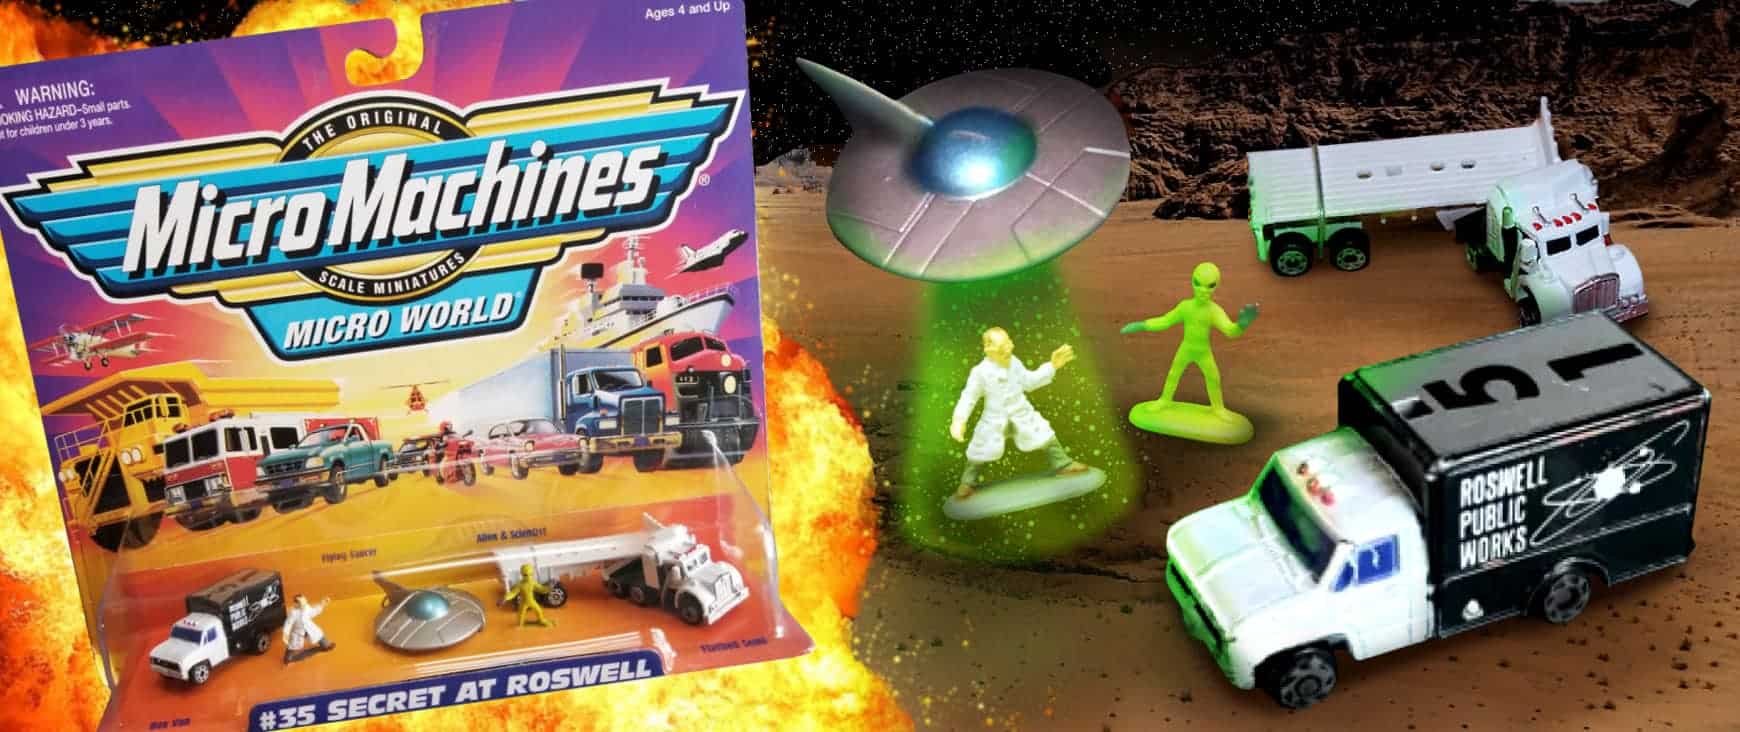 The Classic 80s and 90s Toy Line MICRO MACHINES Is Making a